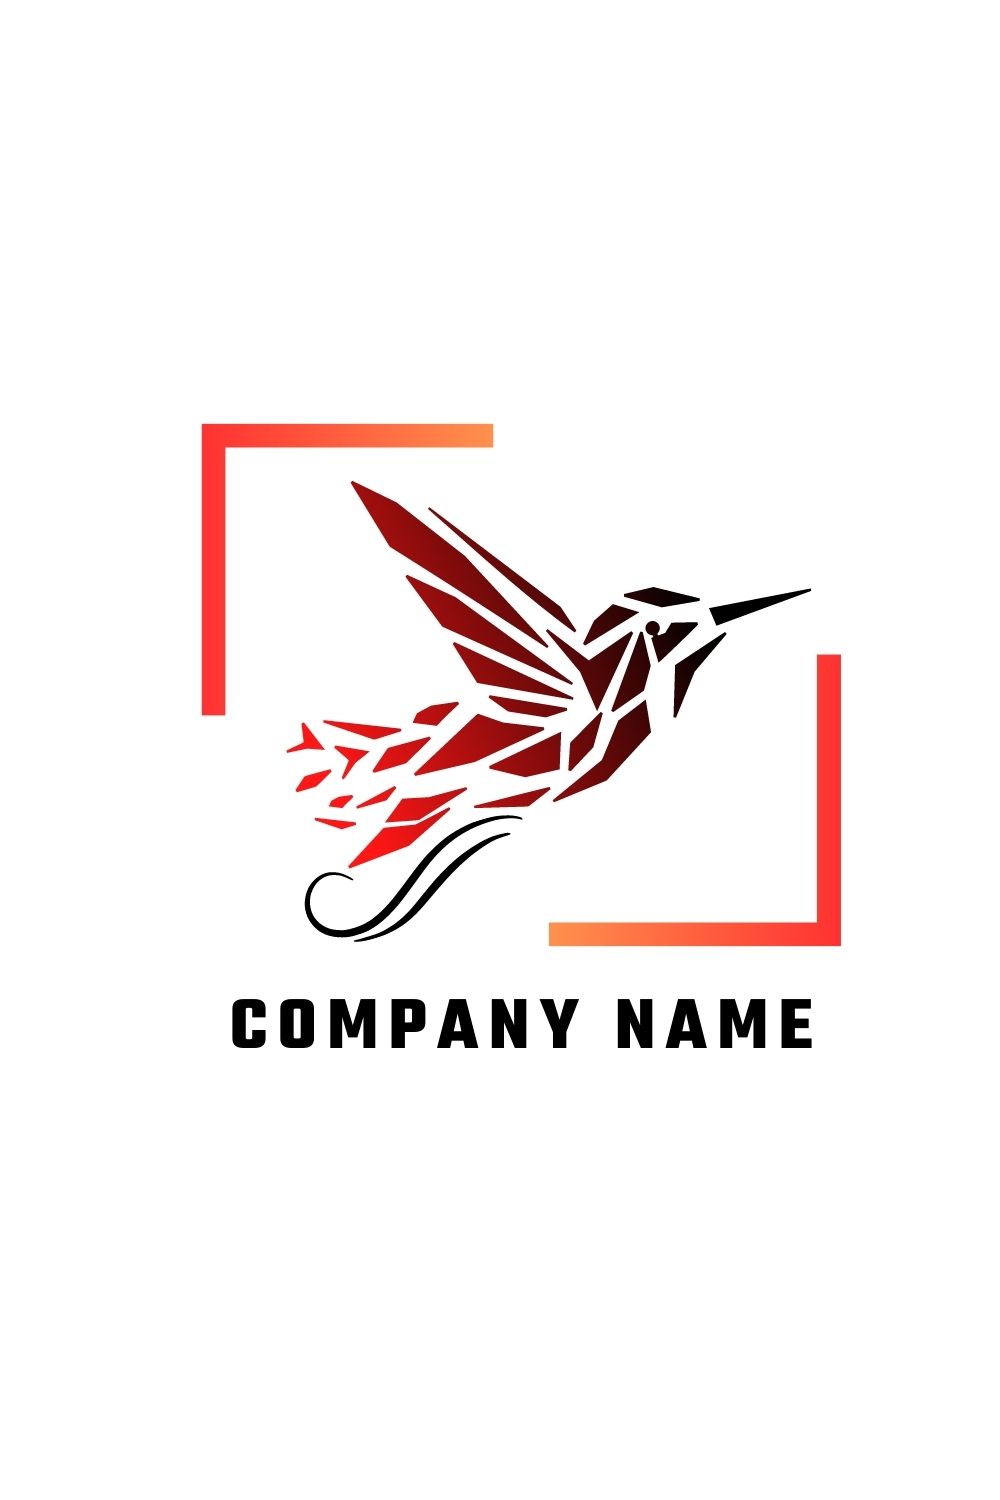 Humming Bird logo for any digital company pinterest preview image.